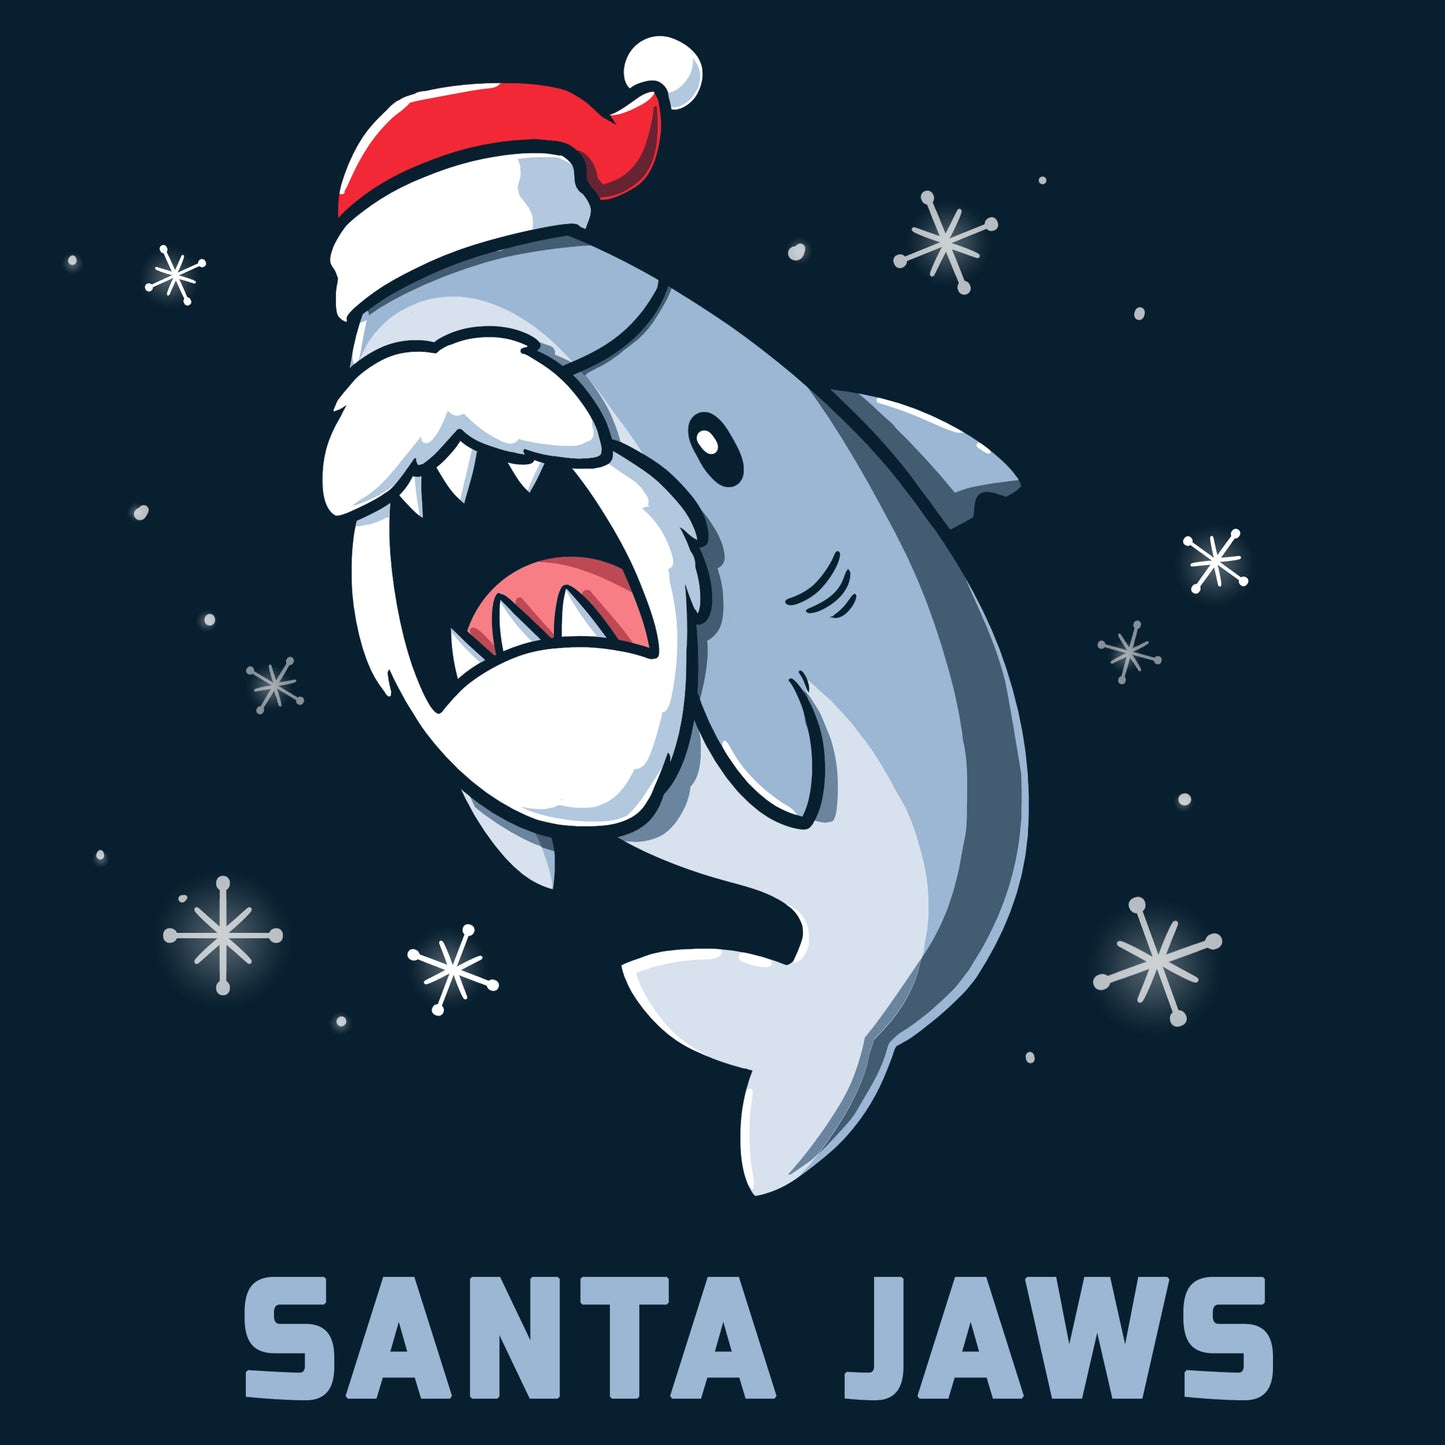 A TeeTurtle original, Santa Jaws by TeeTurtle, wearing a navy blue hat adorned with snowflakes.